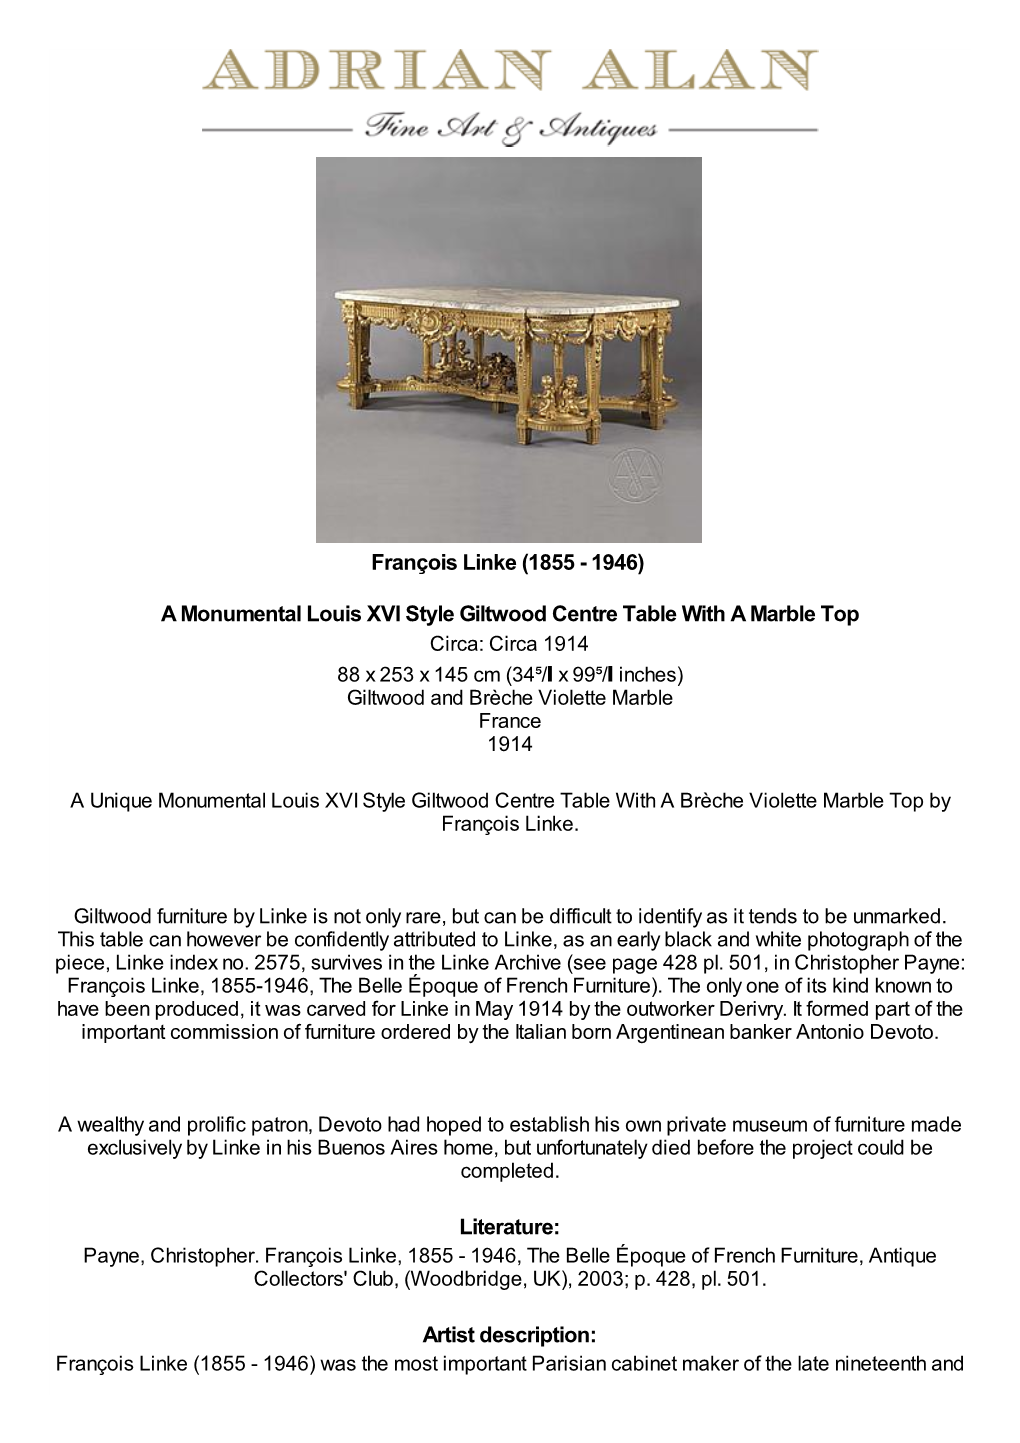 A Monumental Louis XVI Style Giltwood Centre Table with A